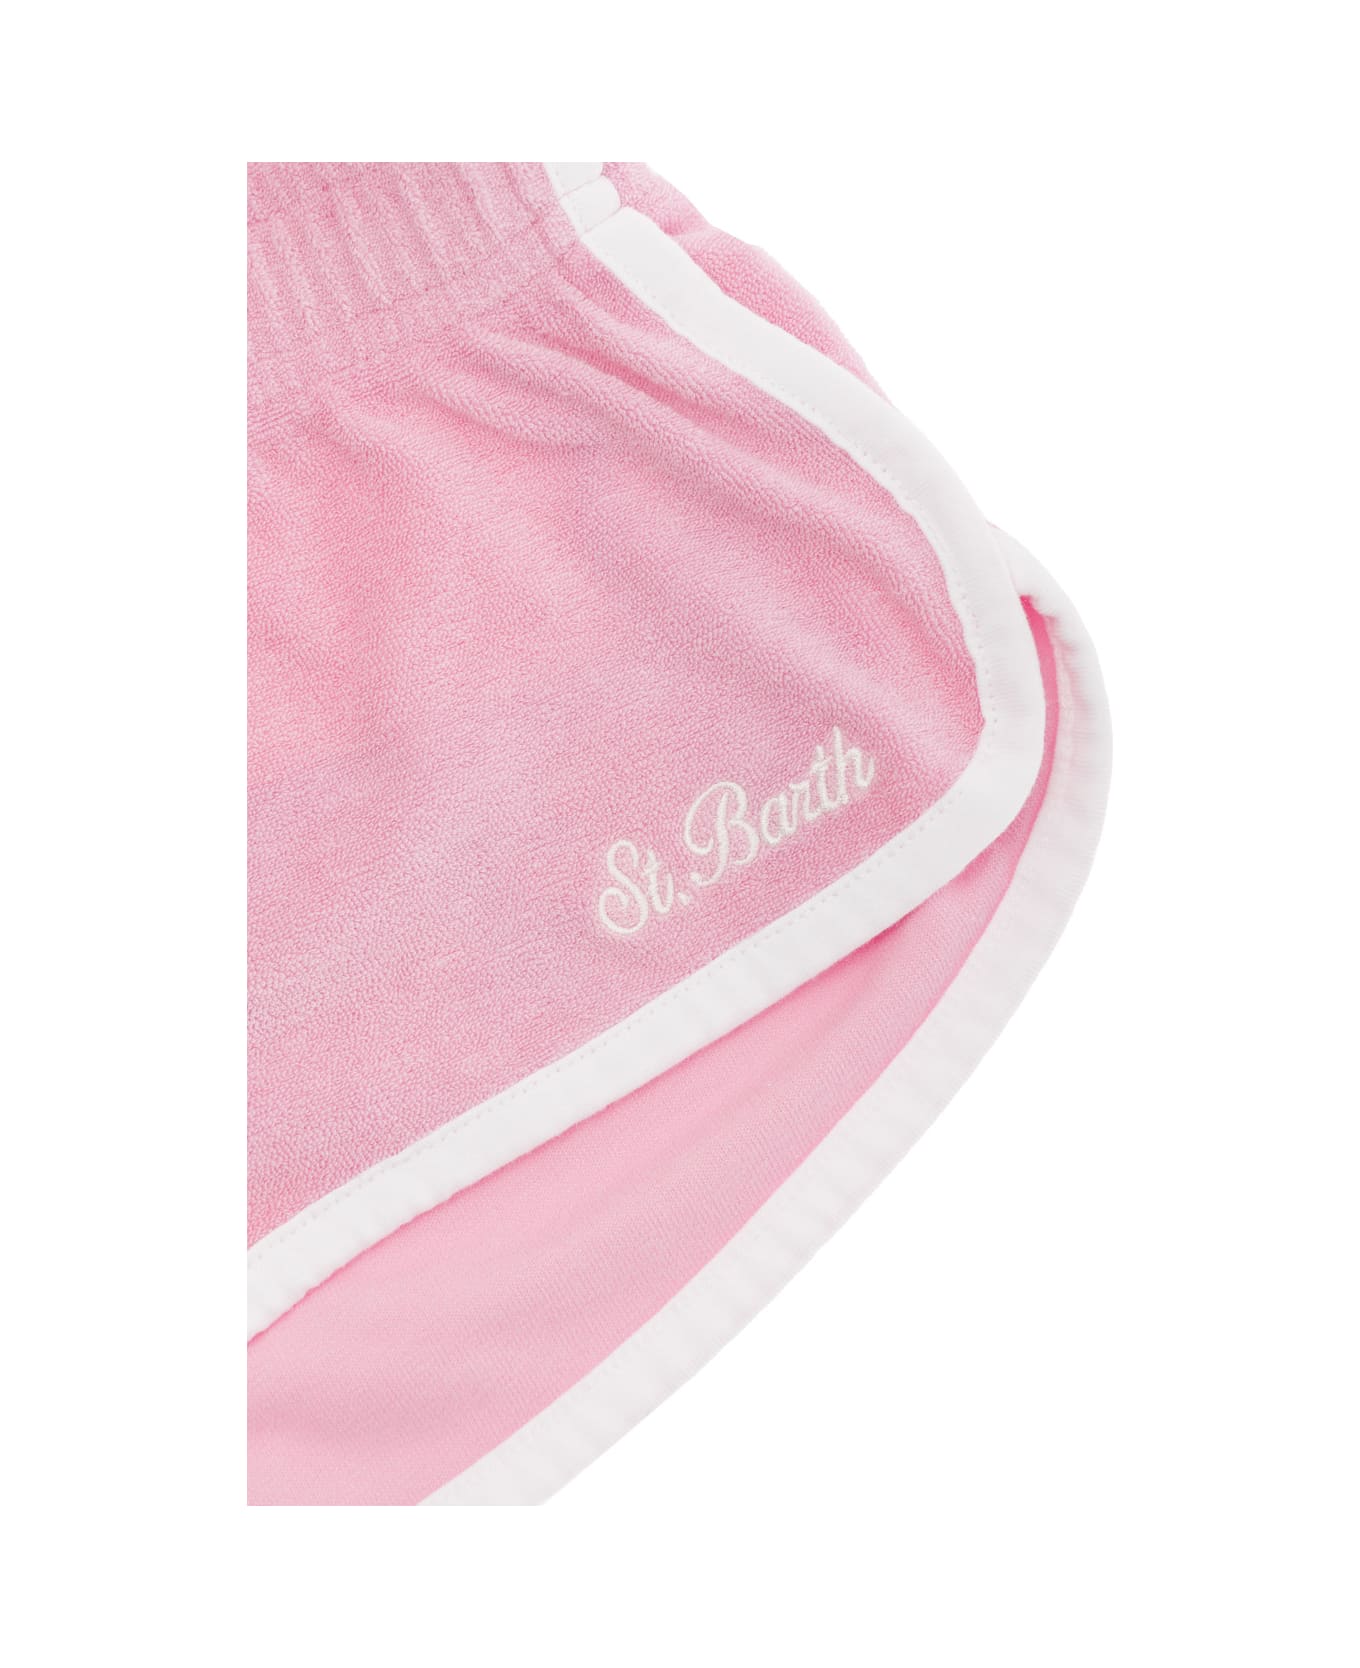 MC2 Saint Barth Pink Shorts With Logo Lettering Embroidery In Cotton Blend Baby - Pink